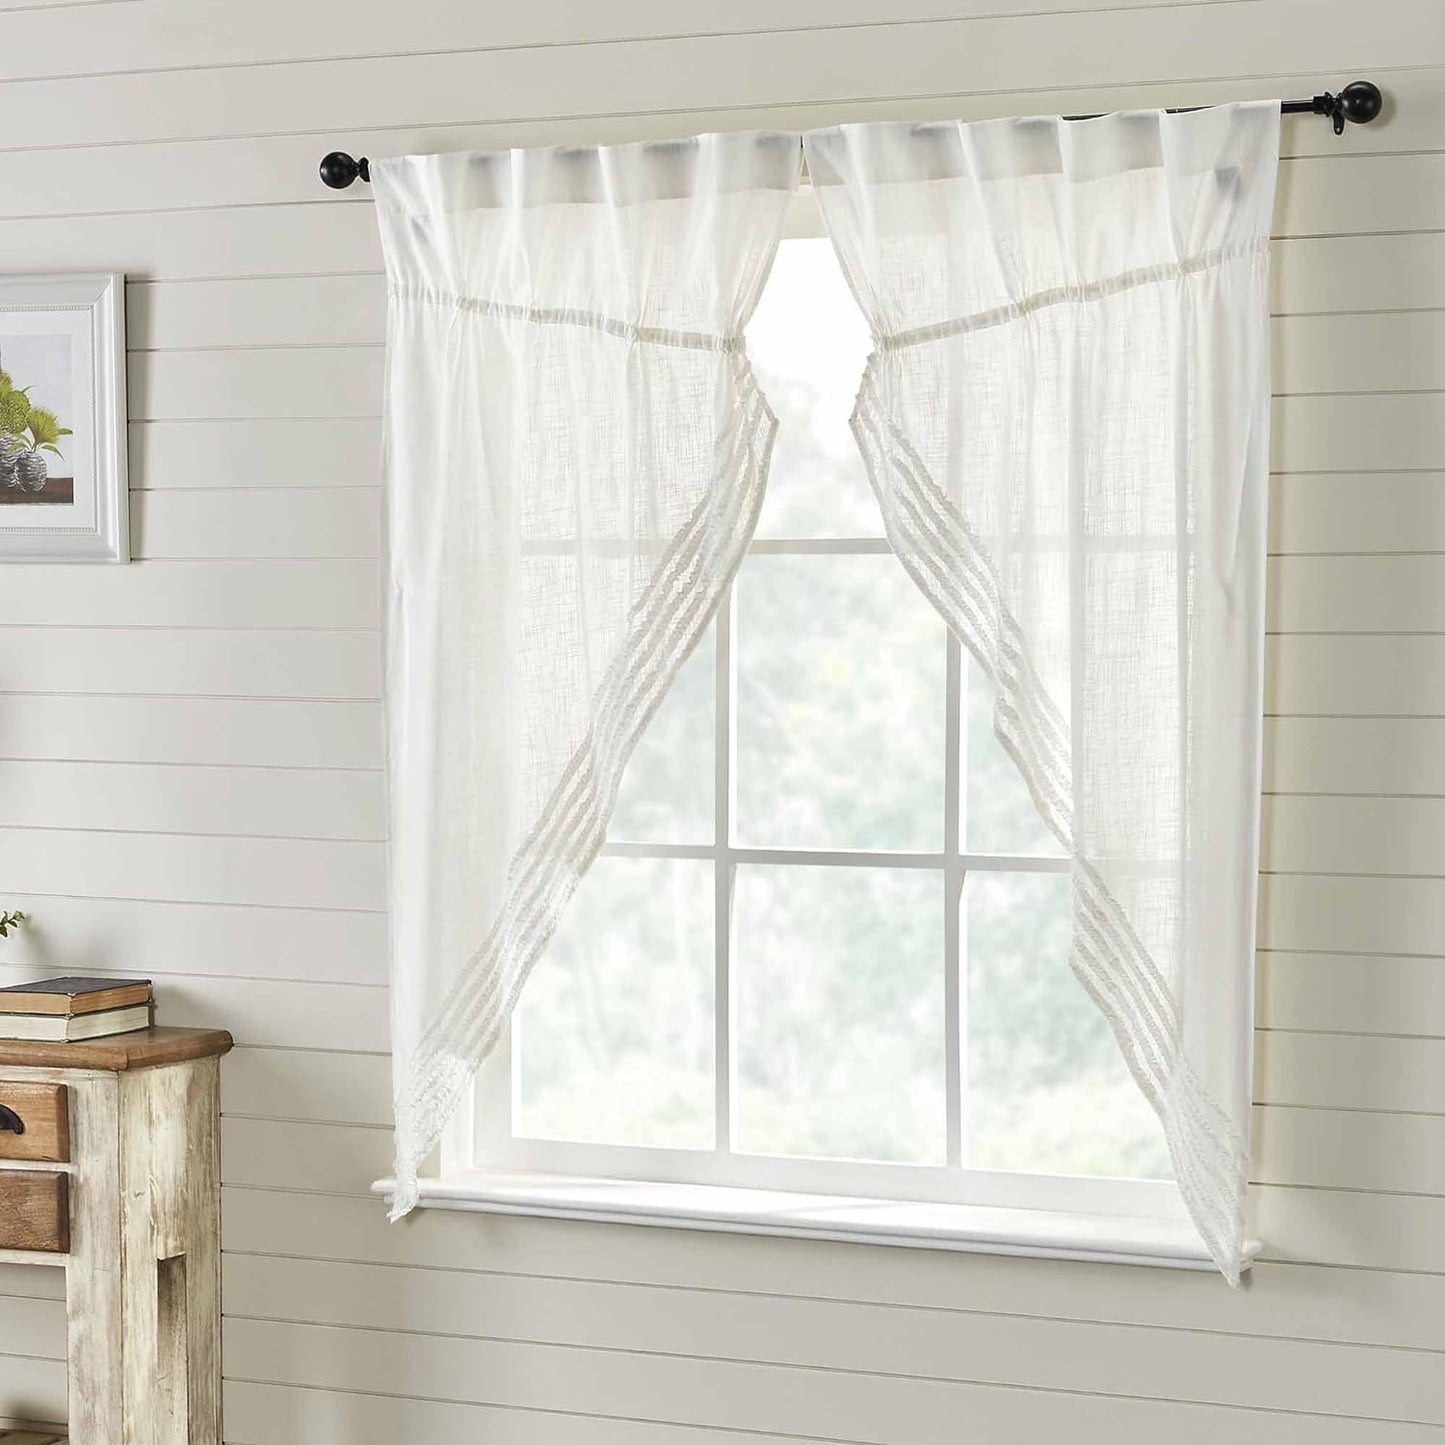 Kathryn Tier Curtains, Set of 2, 24" Long, Ruffled Curtains in a Linen-Look Soft White Cotton Semi-Sheer Fabric, Farmhouse, Cottage, Country Style Sheer Kitchen Café Curtains  Piper Classics Prairie Curtain 63"  